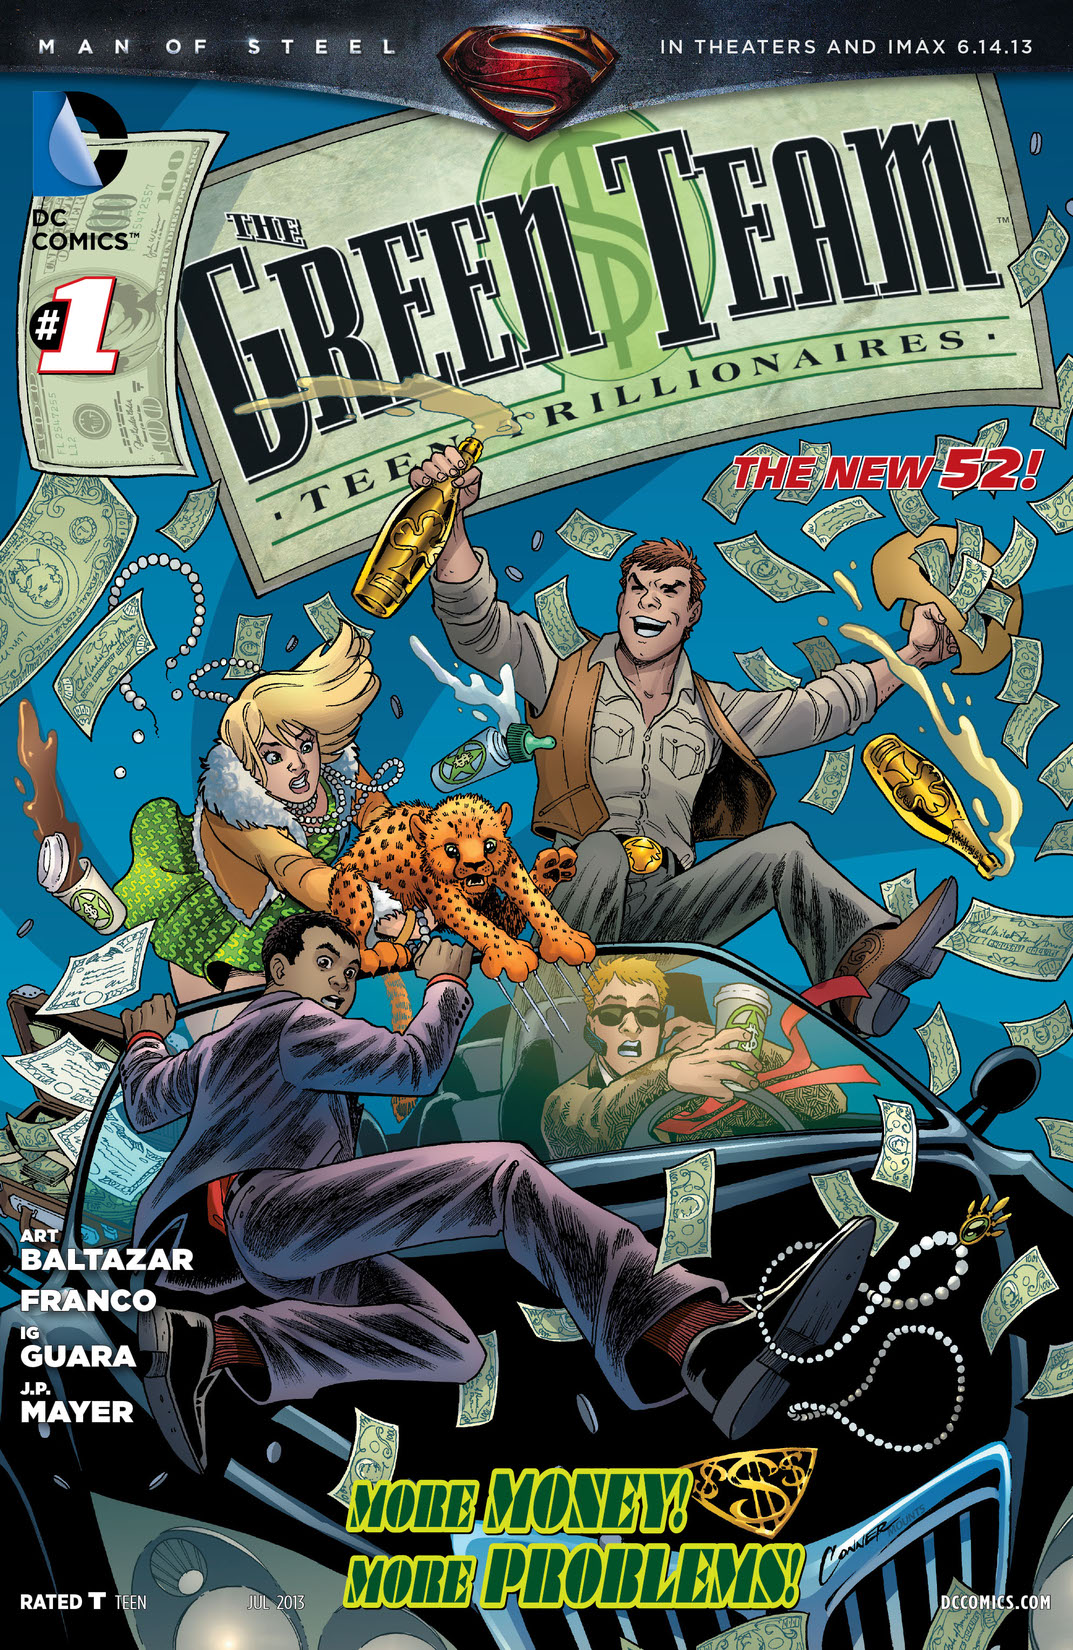 The Green Team: Teen Trillionaires (2013-) #1 preview images